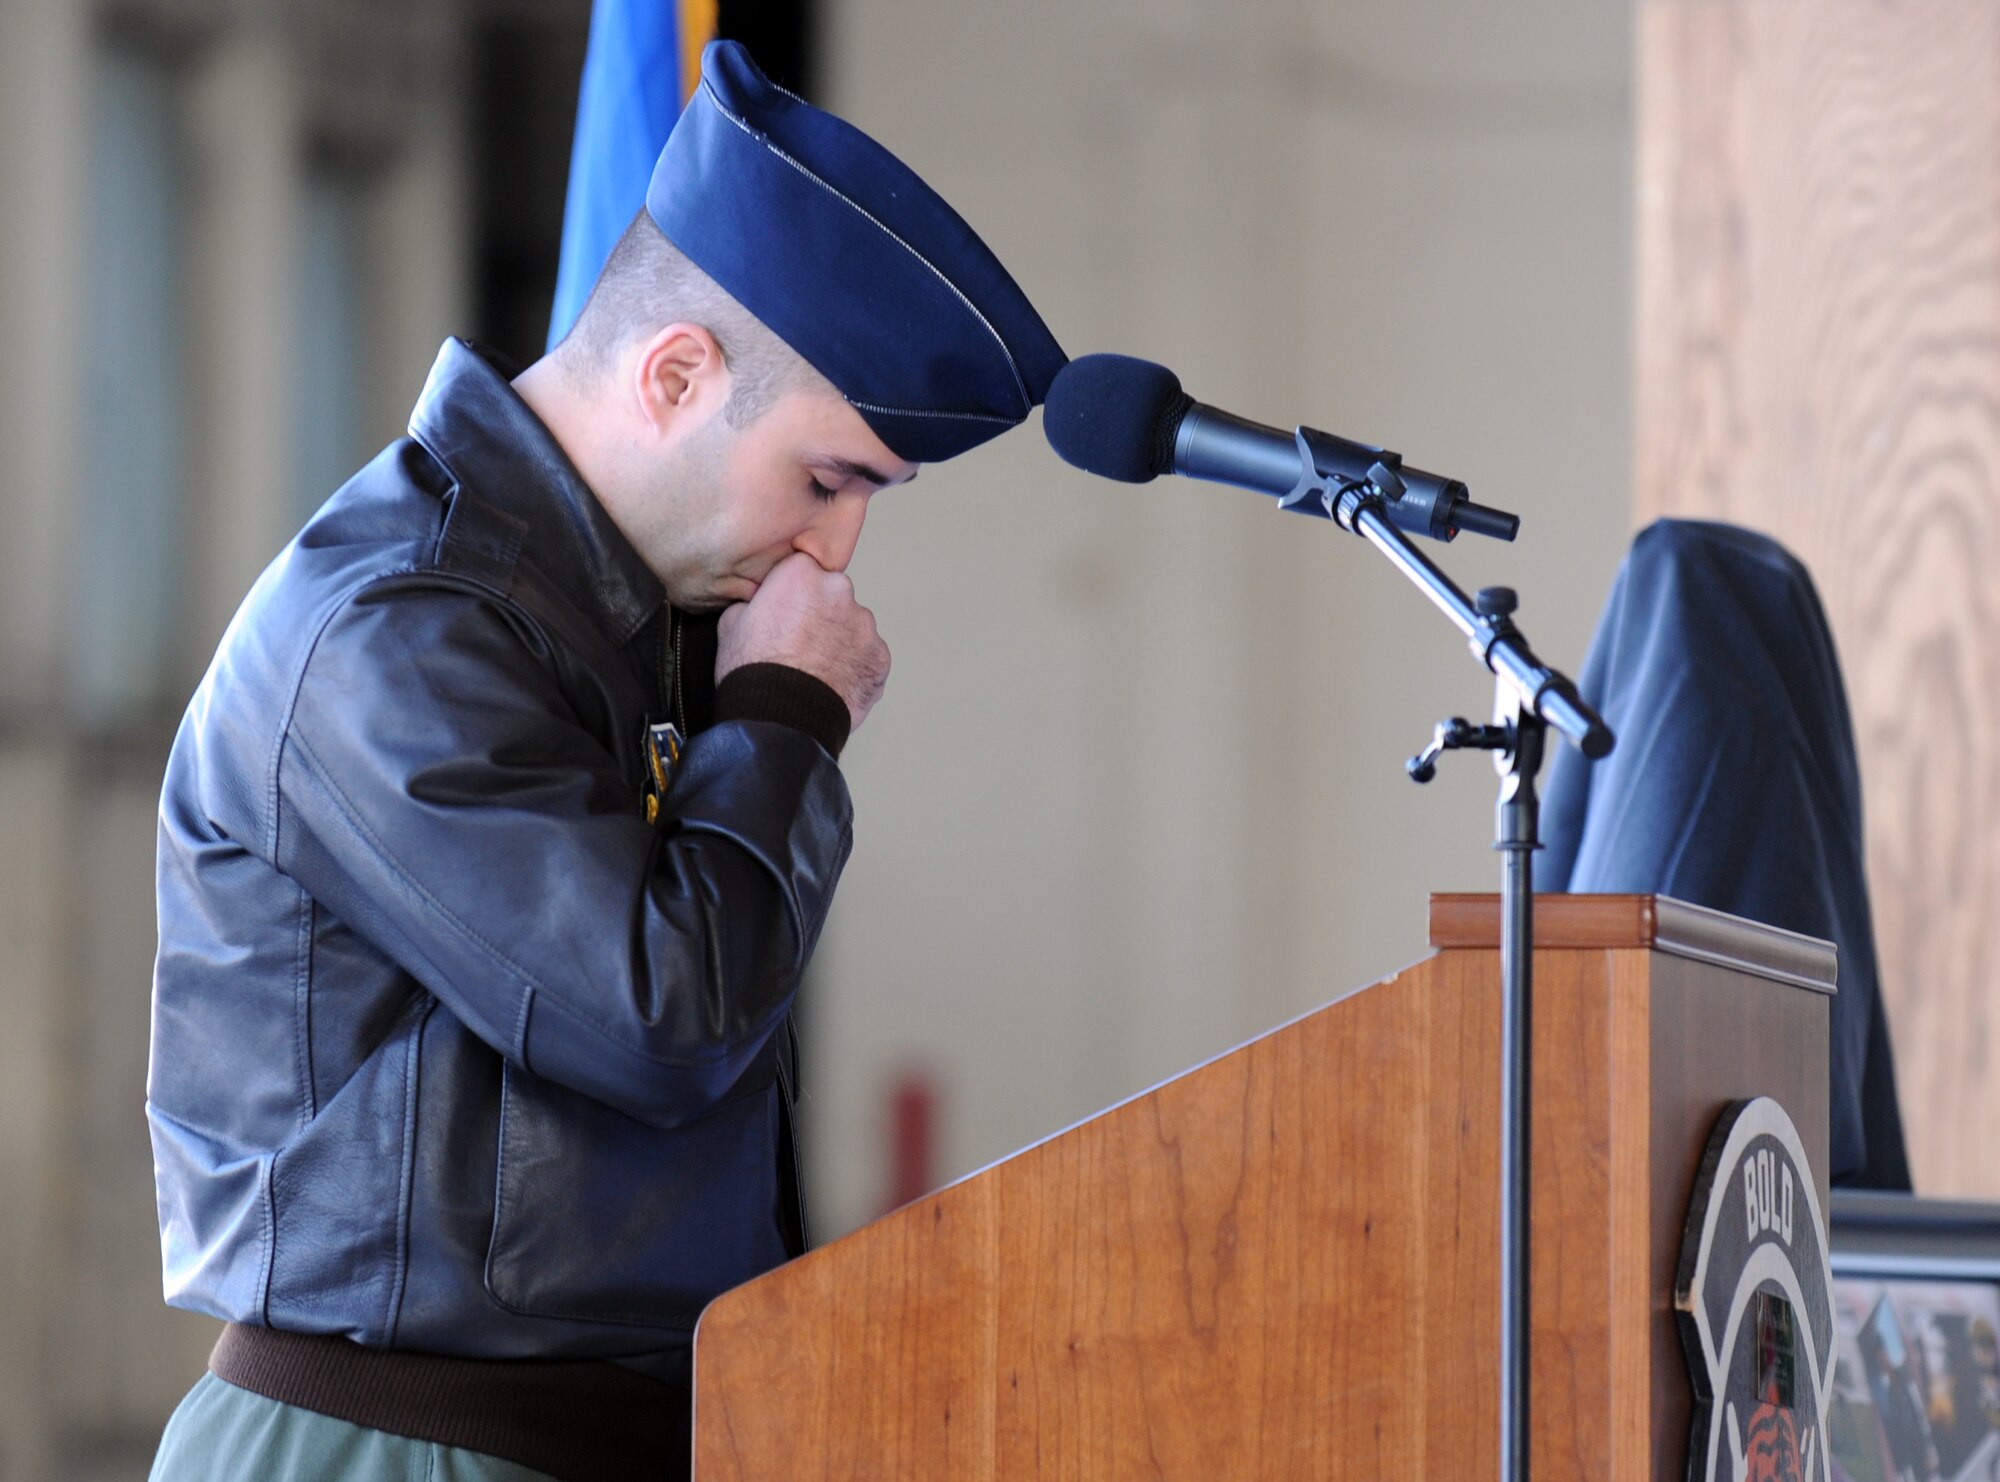 U.S. Air Force Capt. Justin Warner, 391st Fighter Squadron, reads the obituary for Capt. Dee “Piston” Imlay during his memorial service April 6, 2012, at Mountain Home Air Force Base, Idaho.  Warner, who considered Imlay to be one of his closest friends, also worked side-by-side with him during his time at MHAFB. (U.S. Air Force photo/Senior Airman Debbie Lockhart)